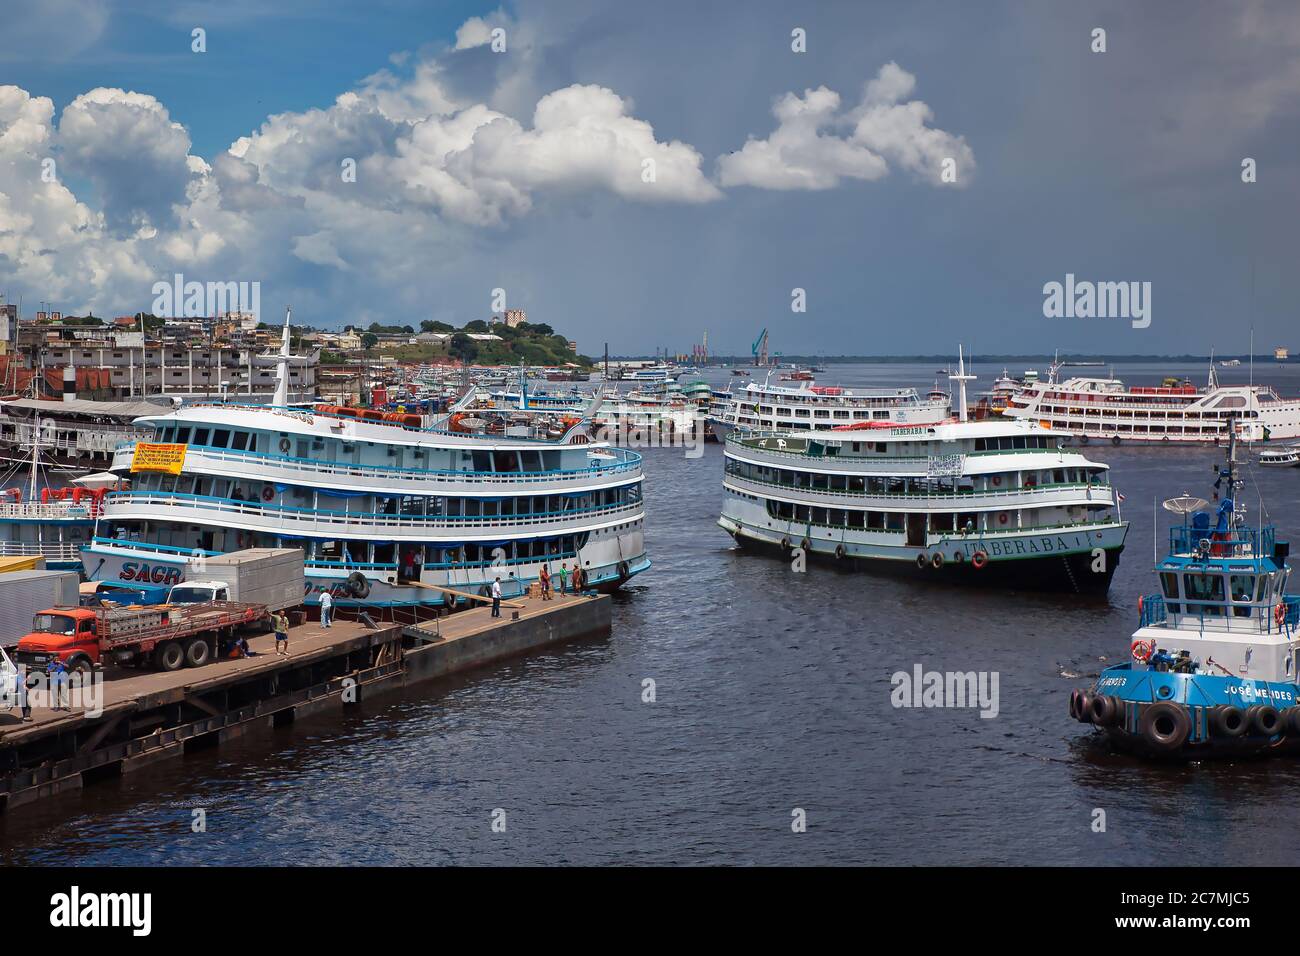 Typical Brazilian style ferry boats manoeuvre at the dockside of Manaus on the River Amazon, Amazonas State, Brazil Stock Photo